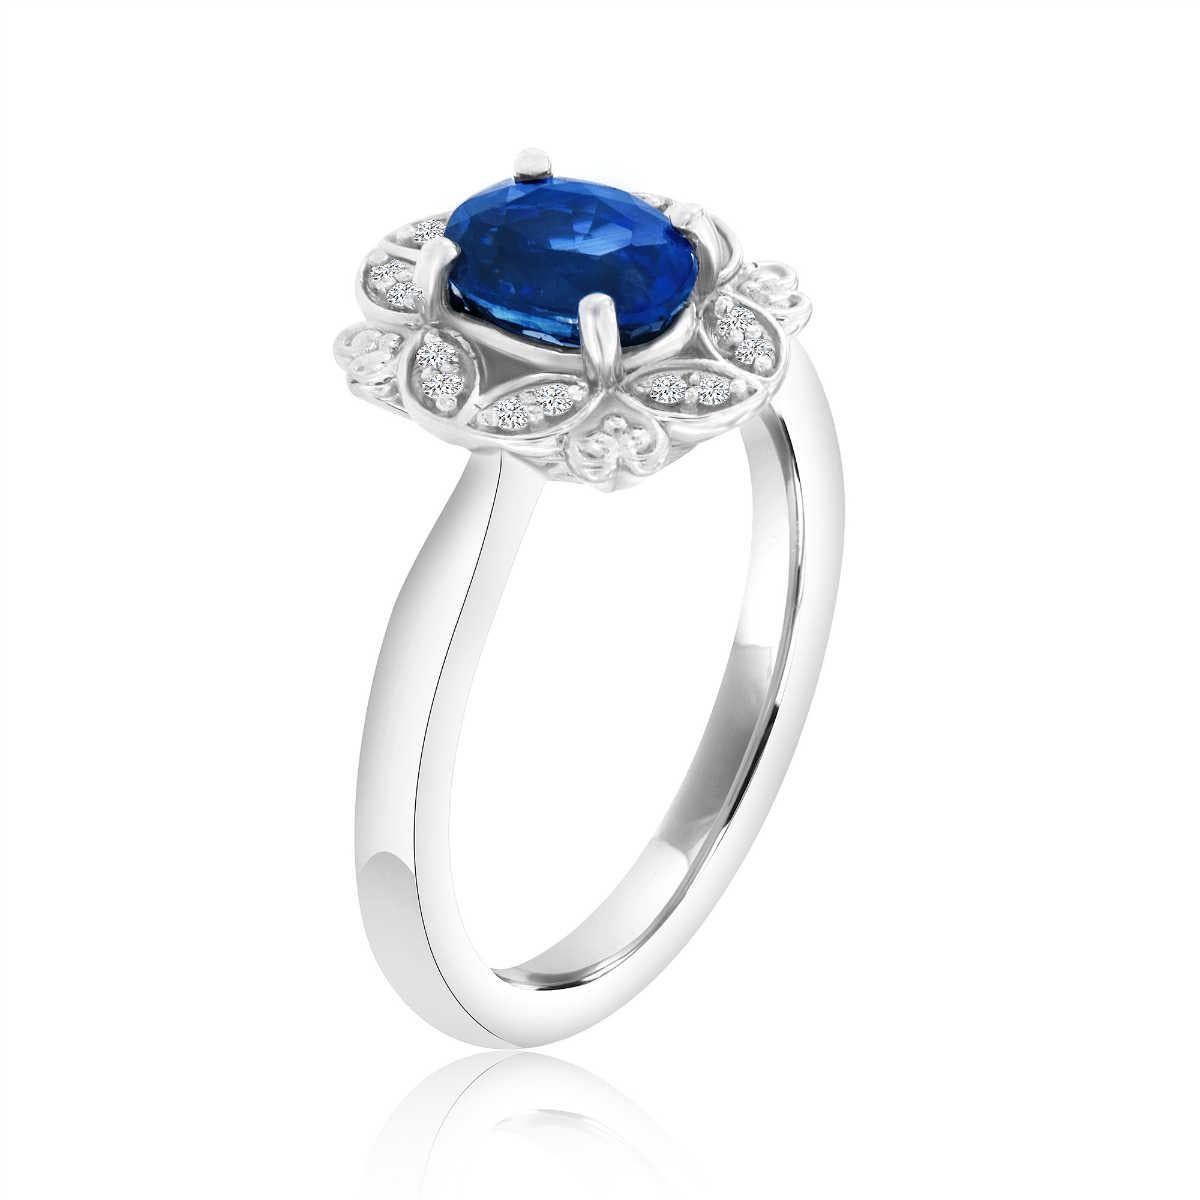 This ring features a 1.42-carat oval-shaped Sapphire encircled by a floral halo of diamonds set in a marquise and heart-shaped milgrain designed to add a vintage look. Experience the difference in person!

Product details: 

Center Gemstone Type: